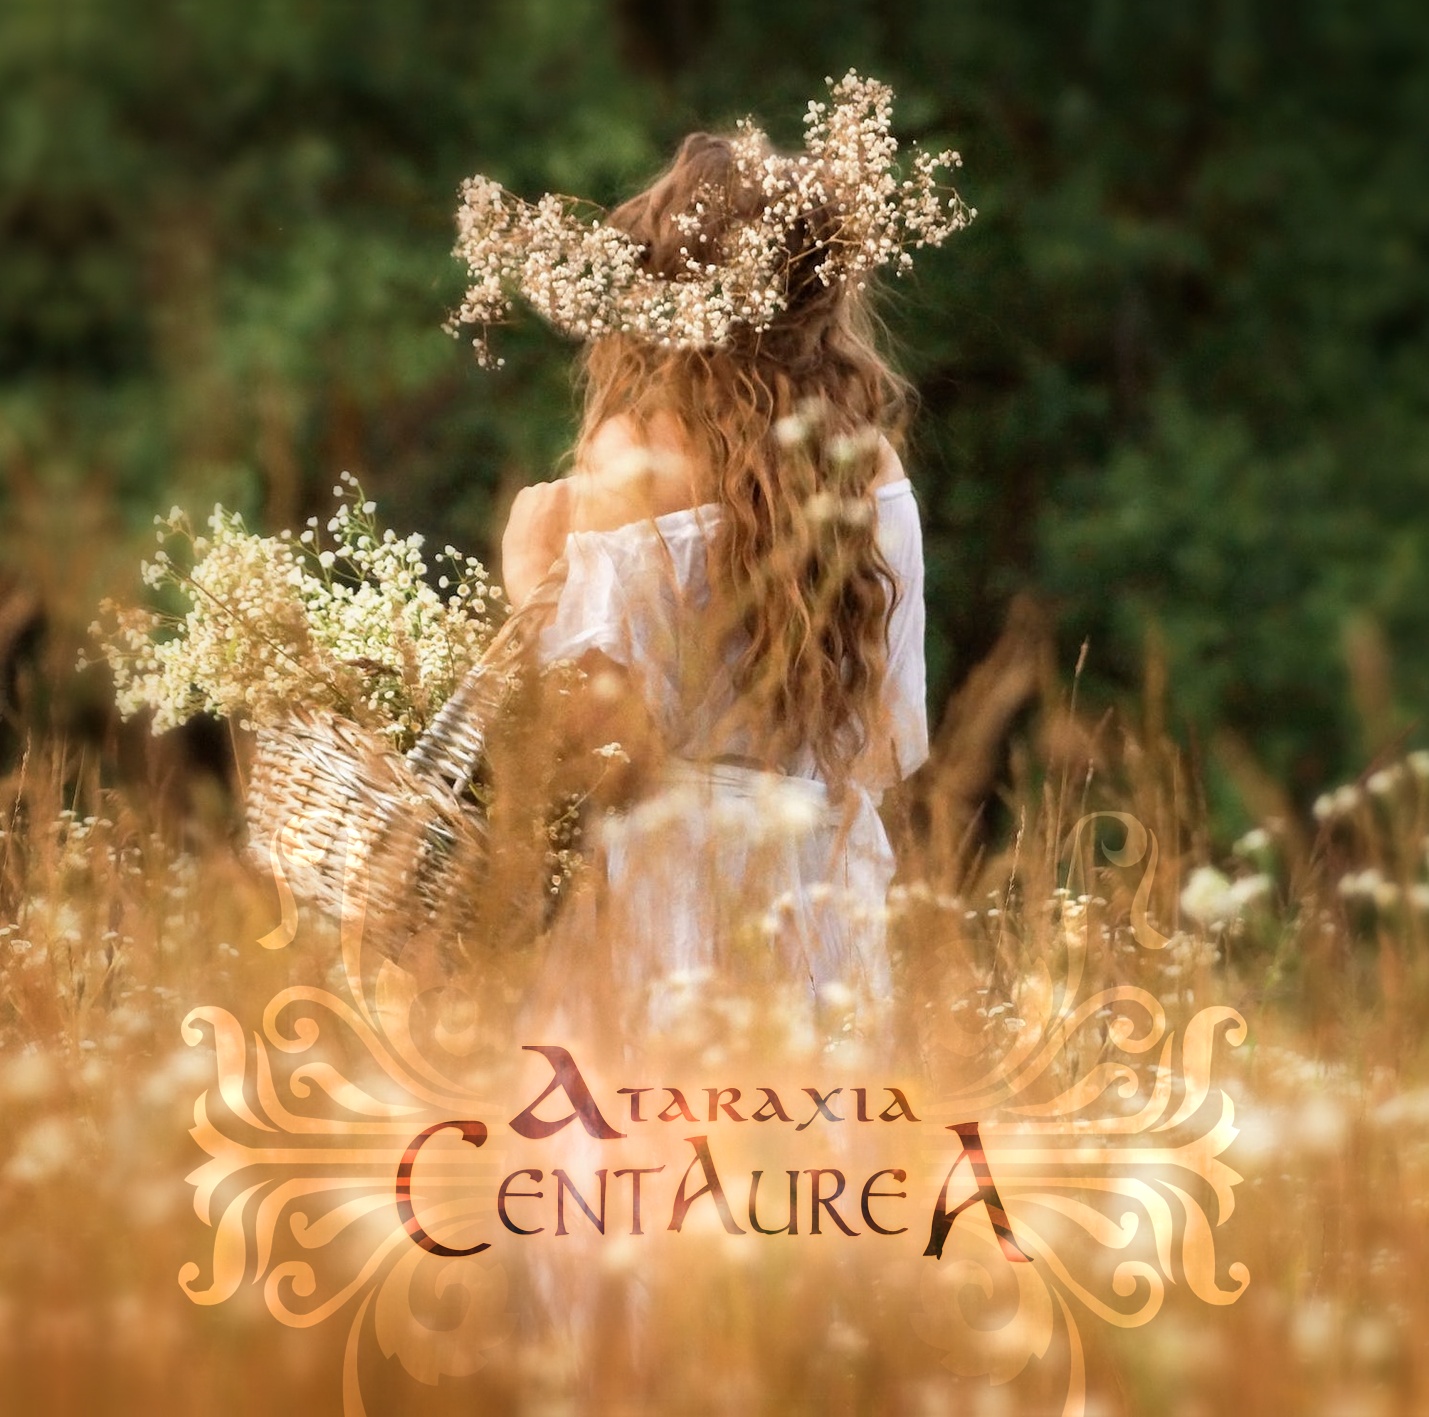 You are currently viewing Ataraxia – Centaurea – New album – Pre order starts today!